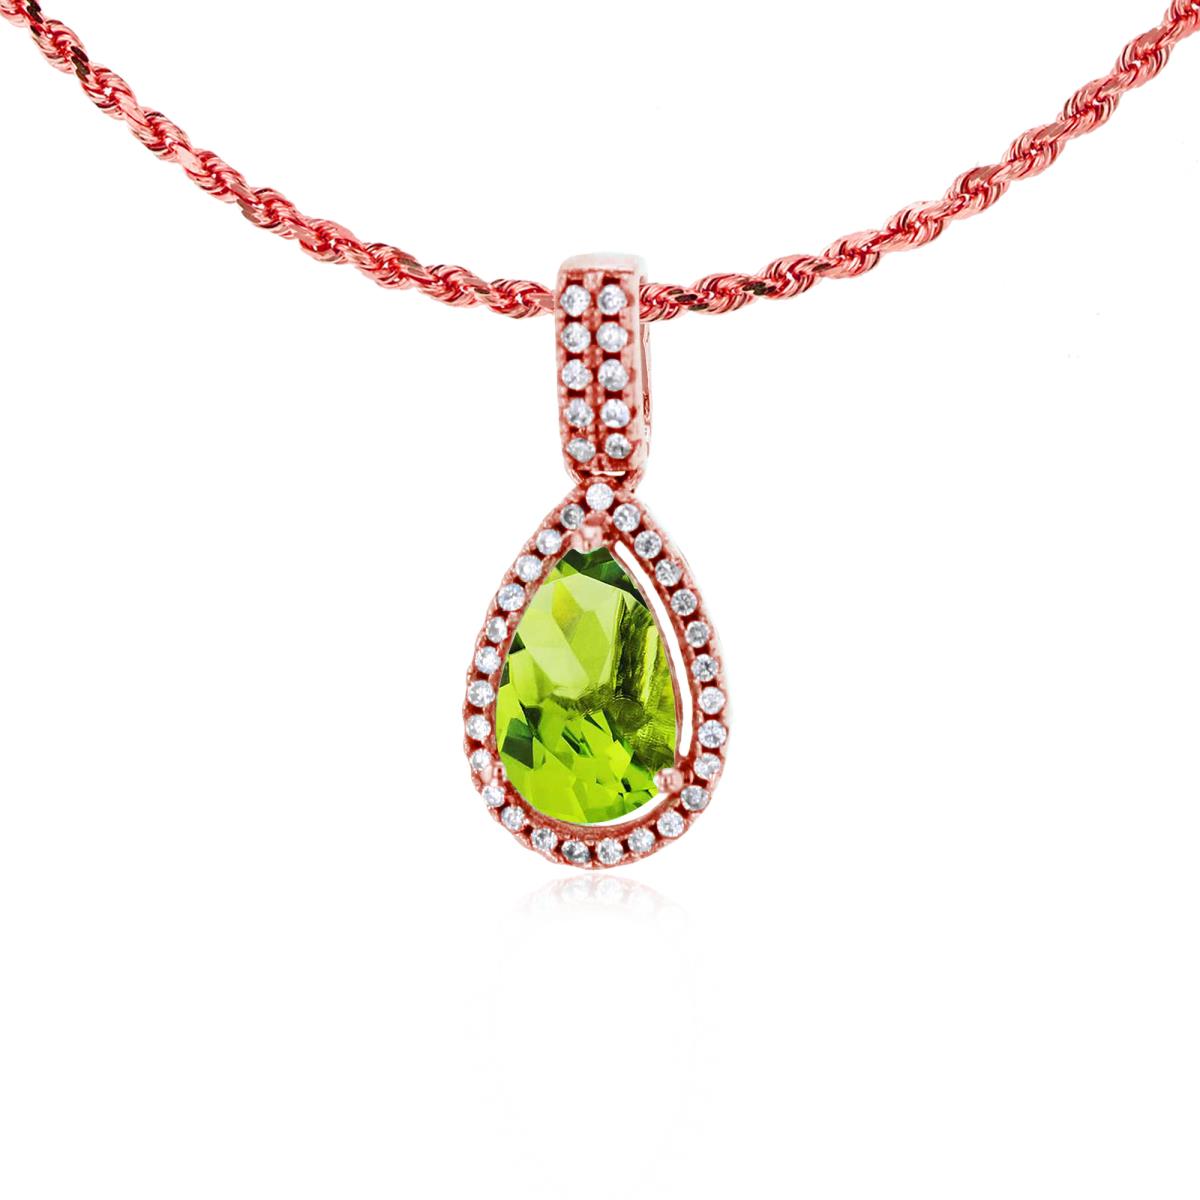 10K Rose Gold 8x5mm Pear Cut Peridot & 0.11 CTTW Diamond Halo 18" Rope Chain Necklace